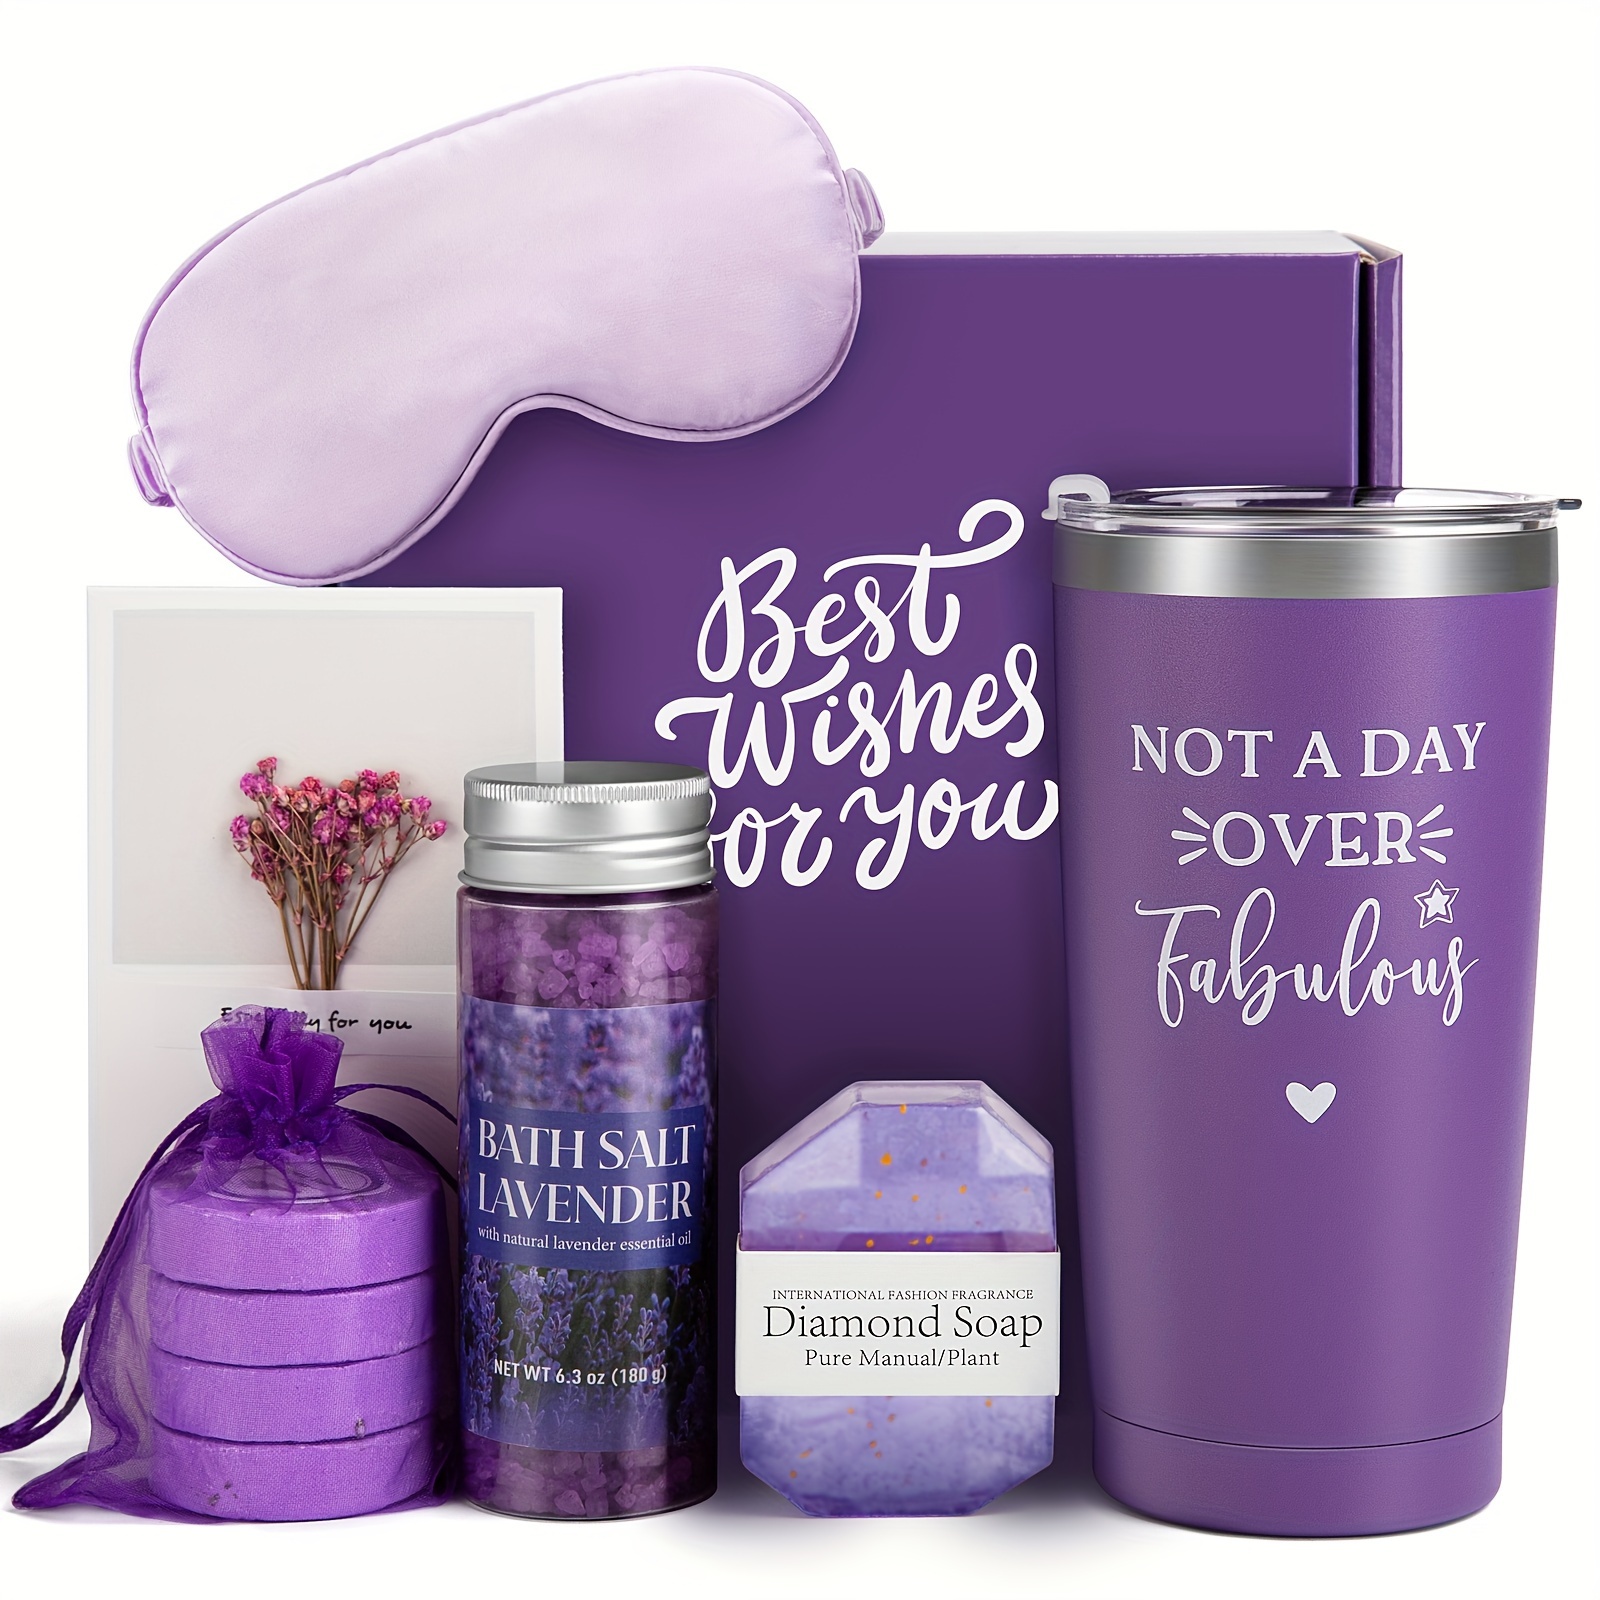 Sisters Gifts from Sister - 7pc Spa Tumbler Self Care Sister Gifts - Relaxing Spa Gift Set - Sister Birthday Gifts from Sister - Wish You Lived Next